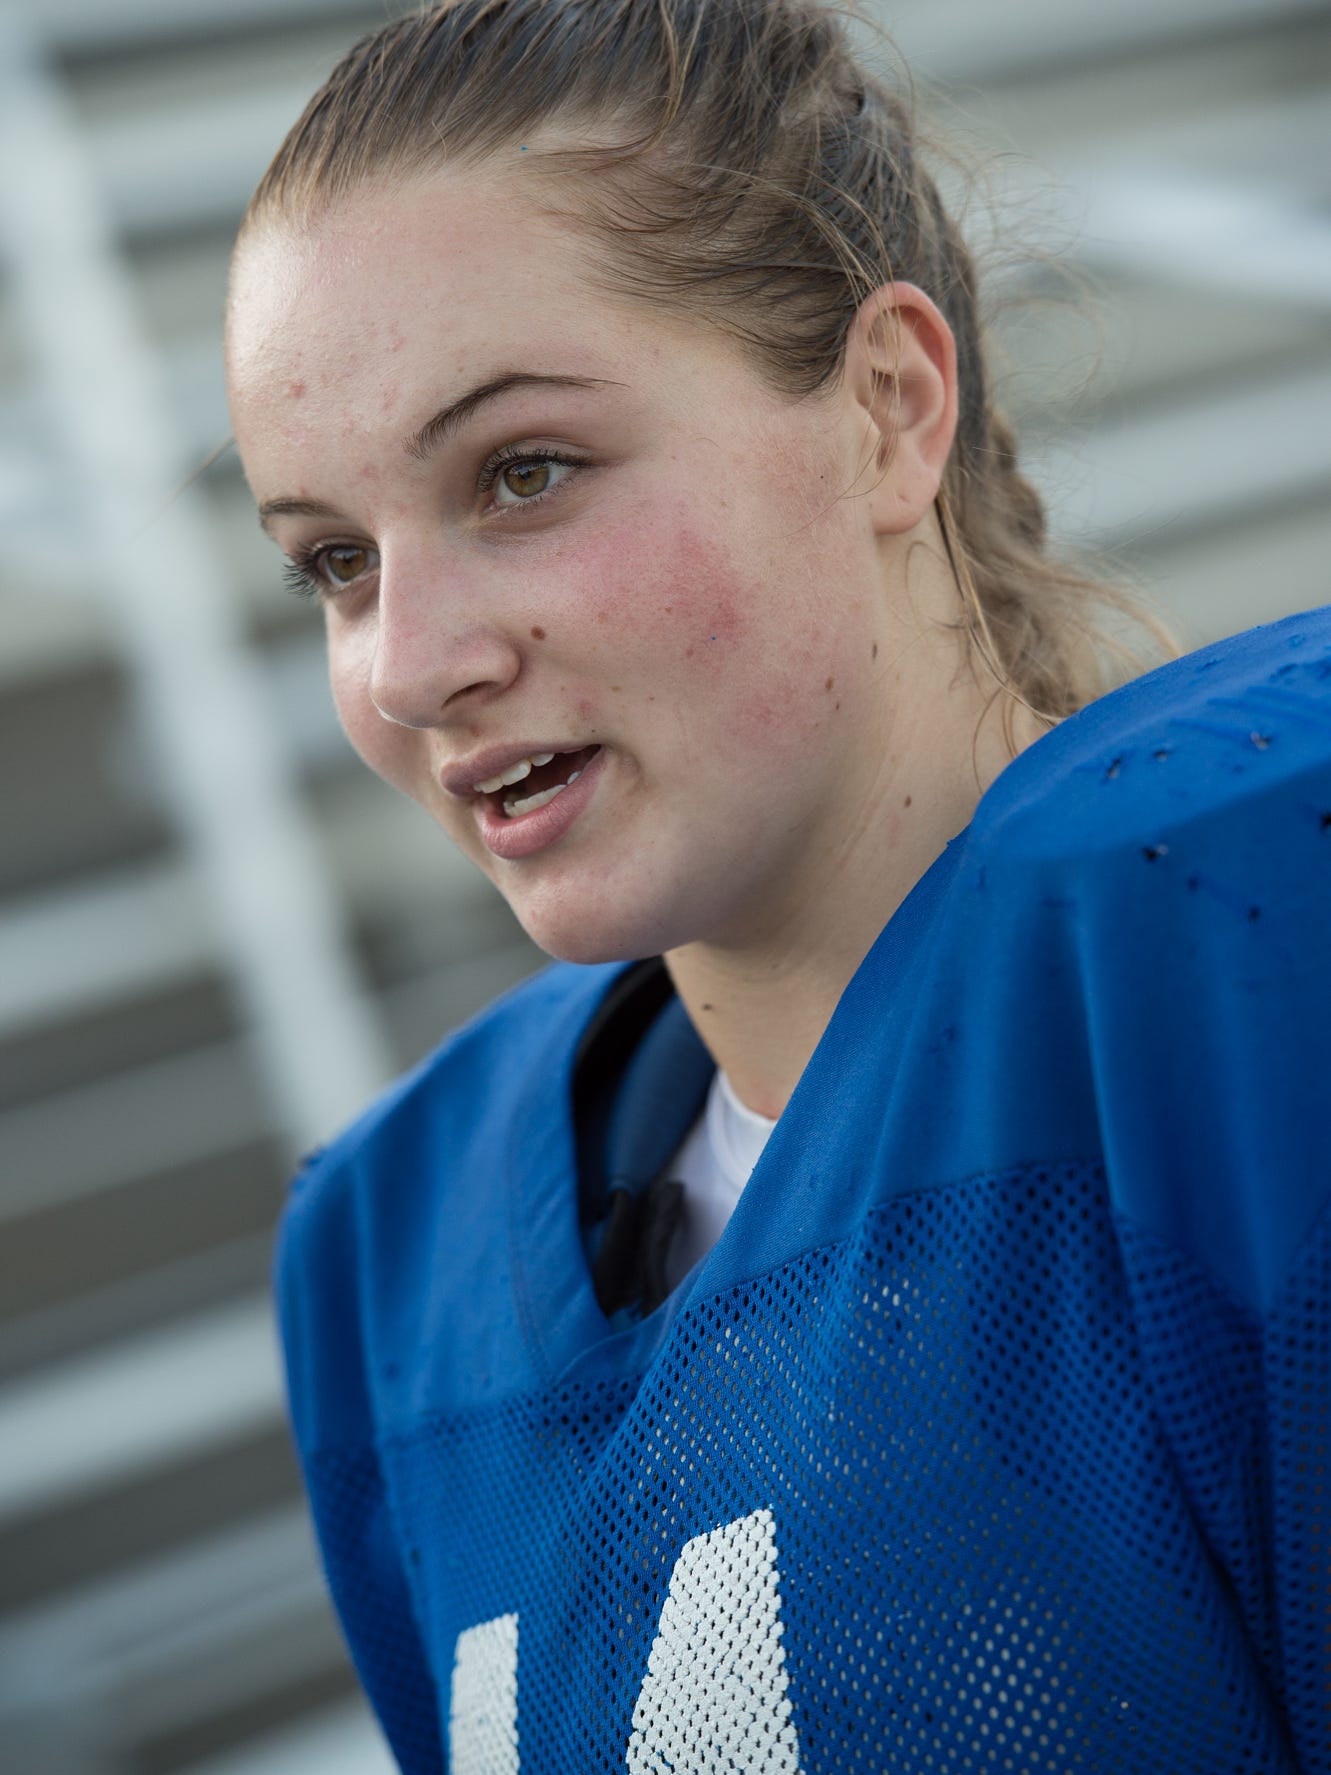 Girl inspires as football player at St. Georges